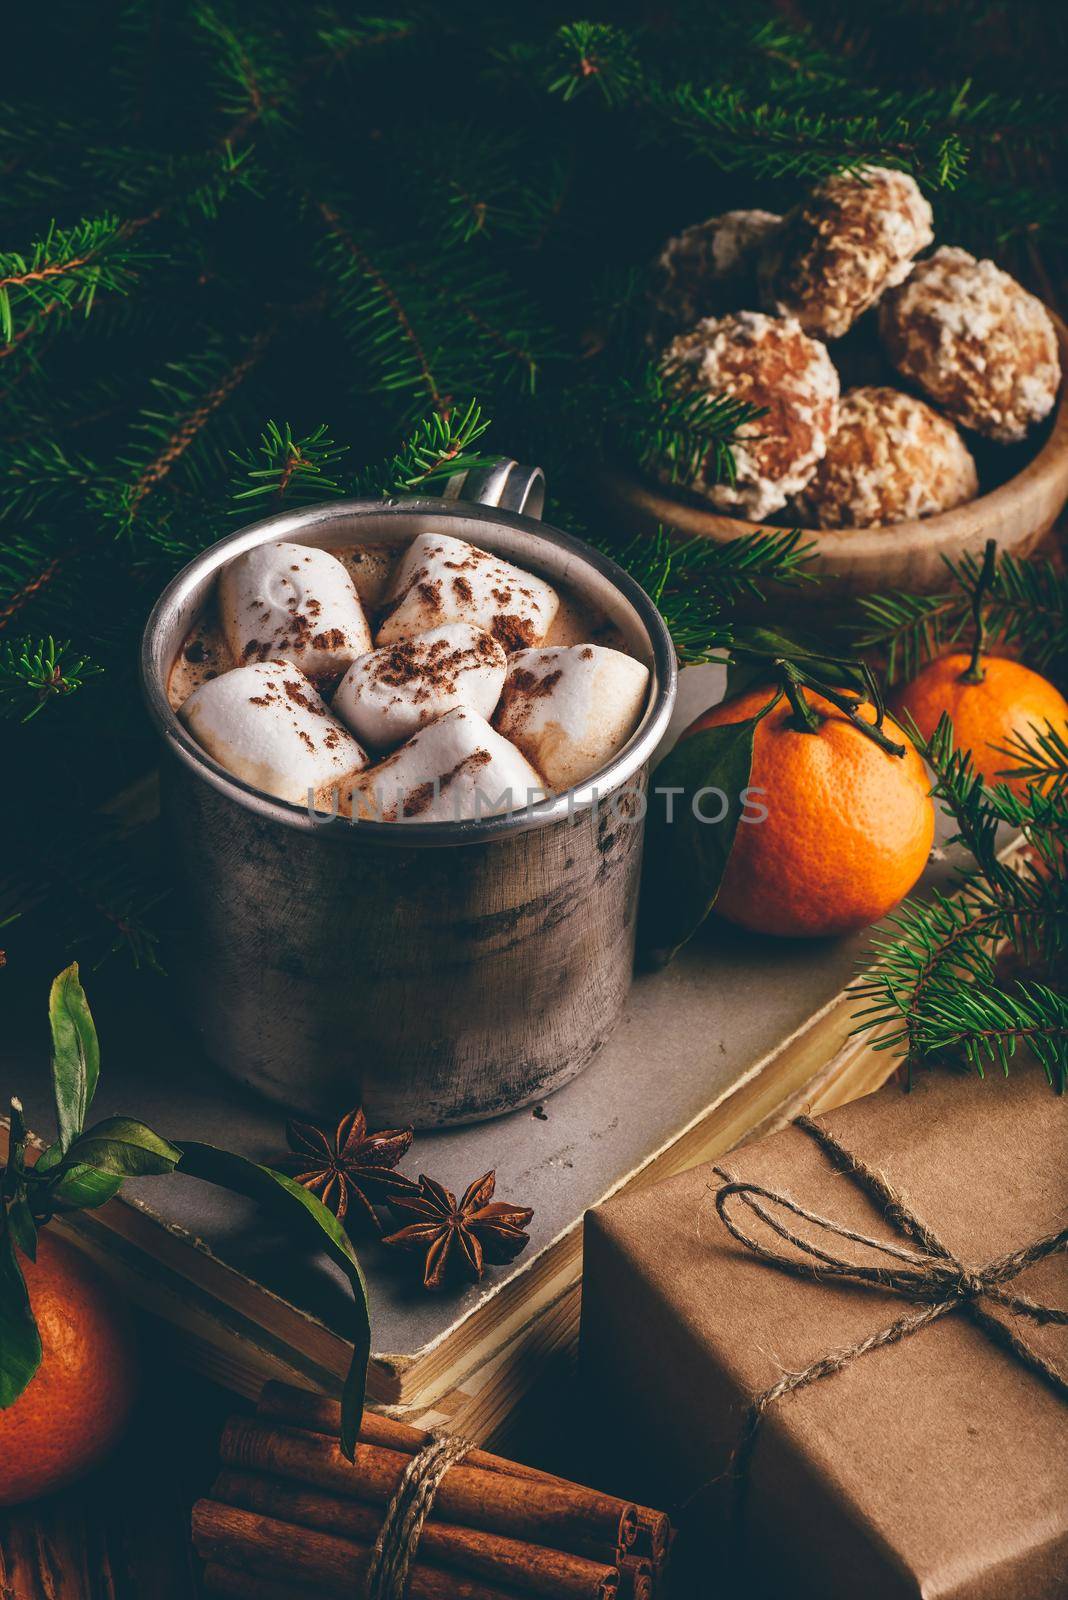 Metal mug of hot chocolate with marshmallows on stack of old books with spices and fruits